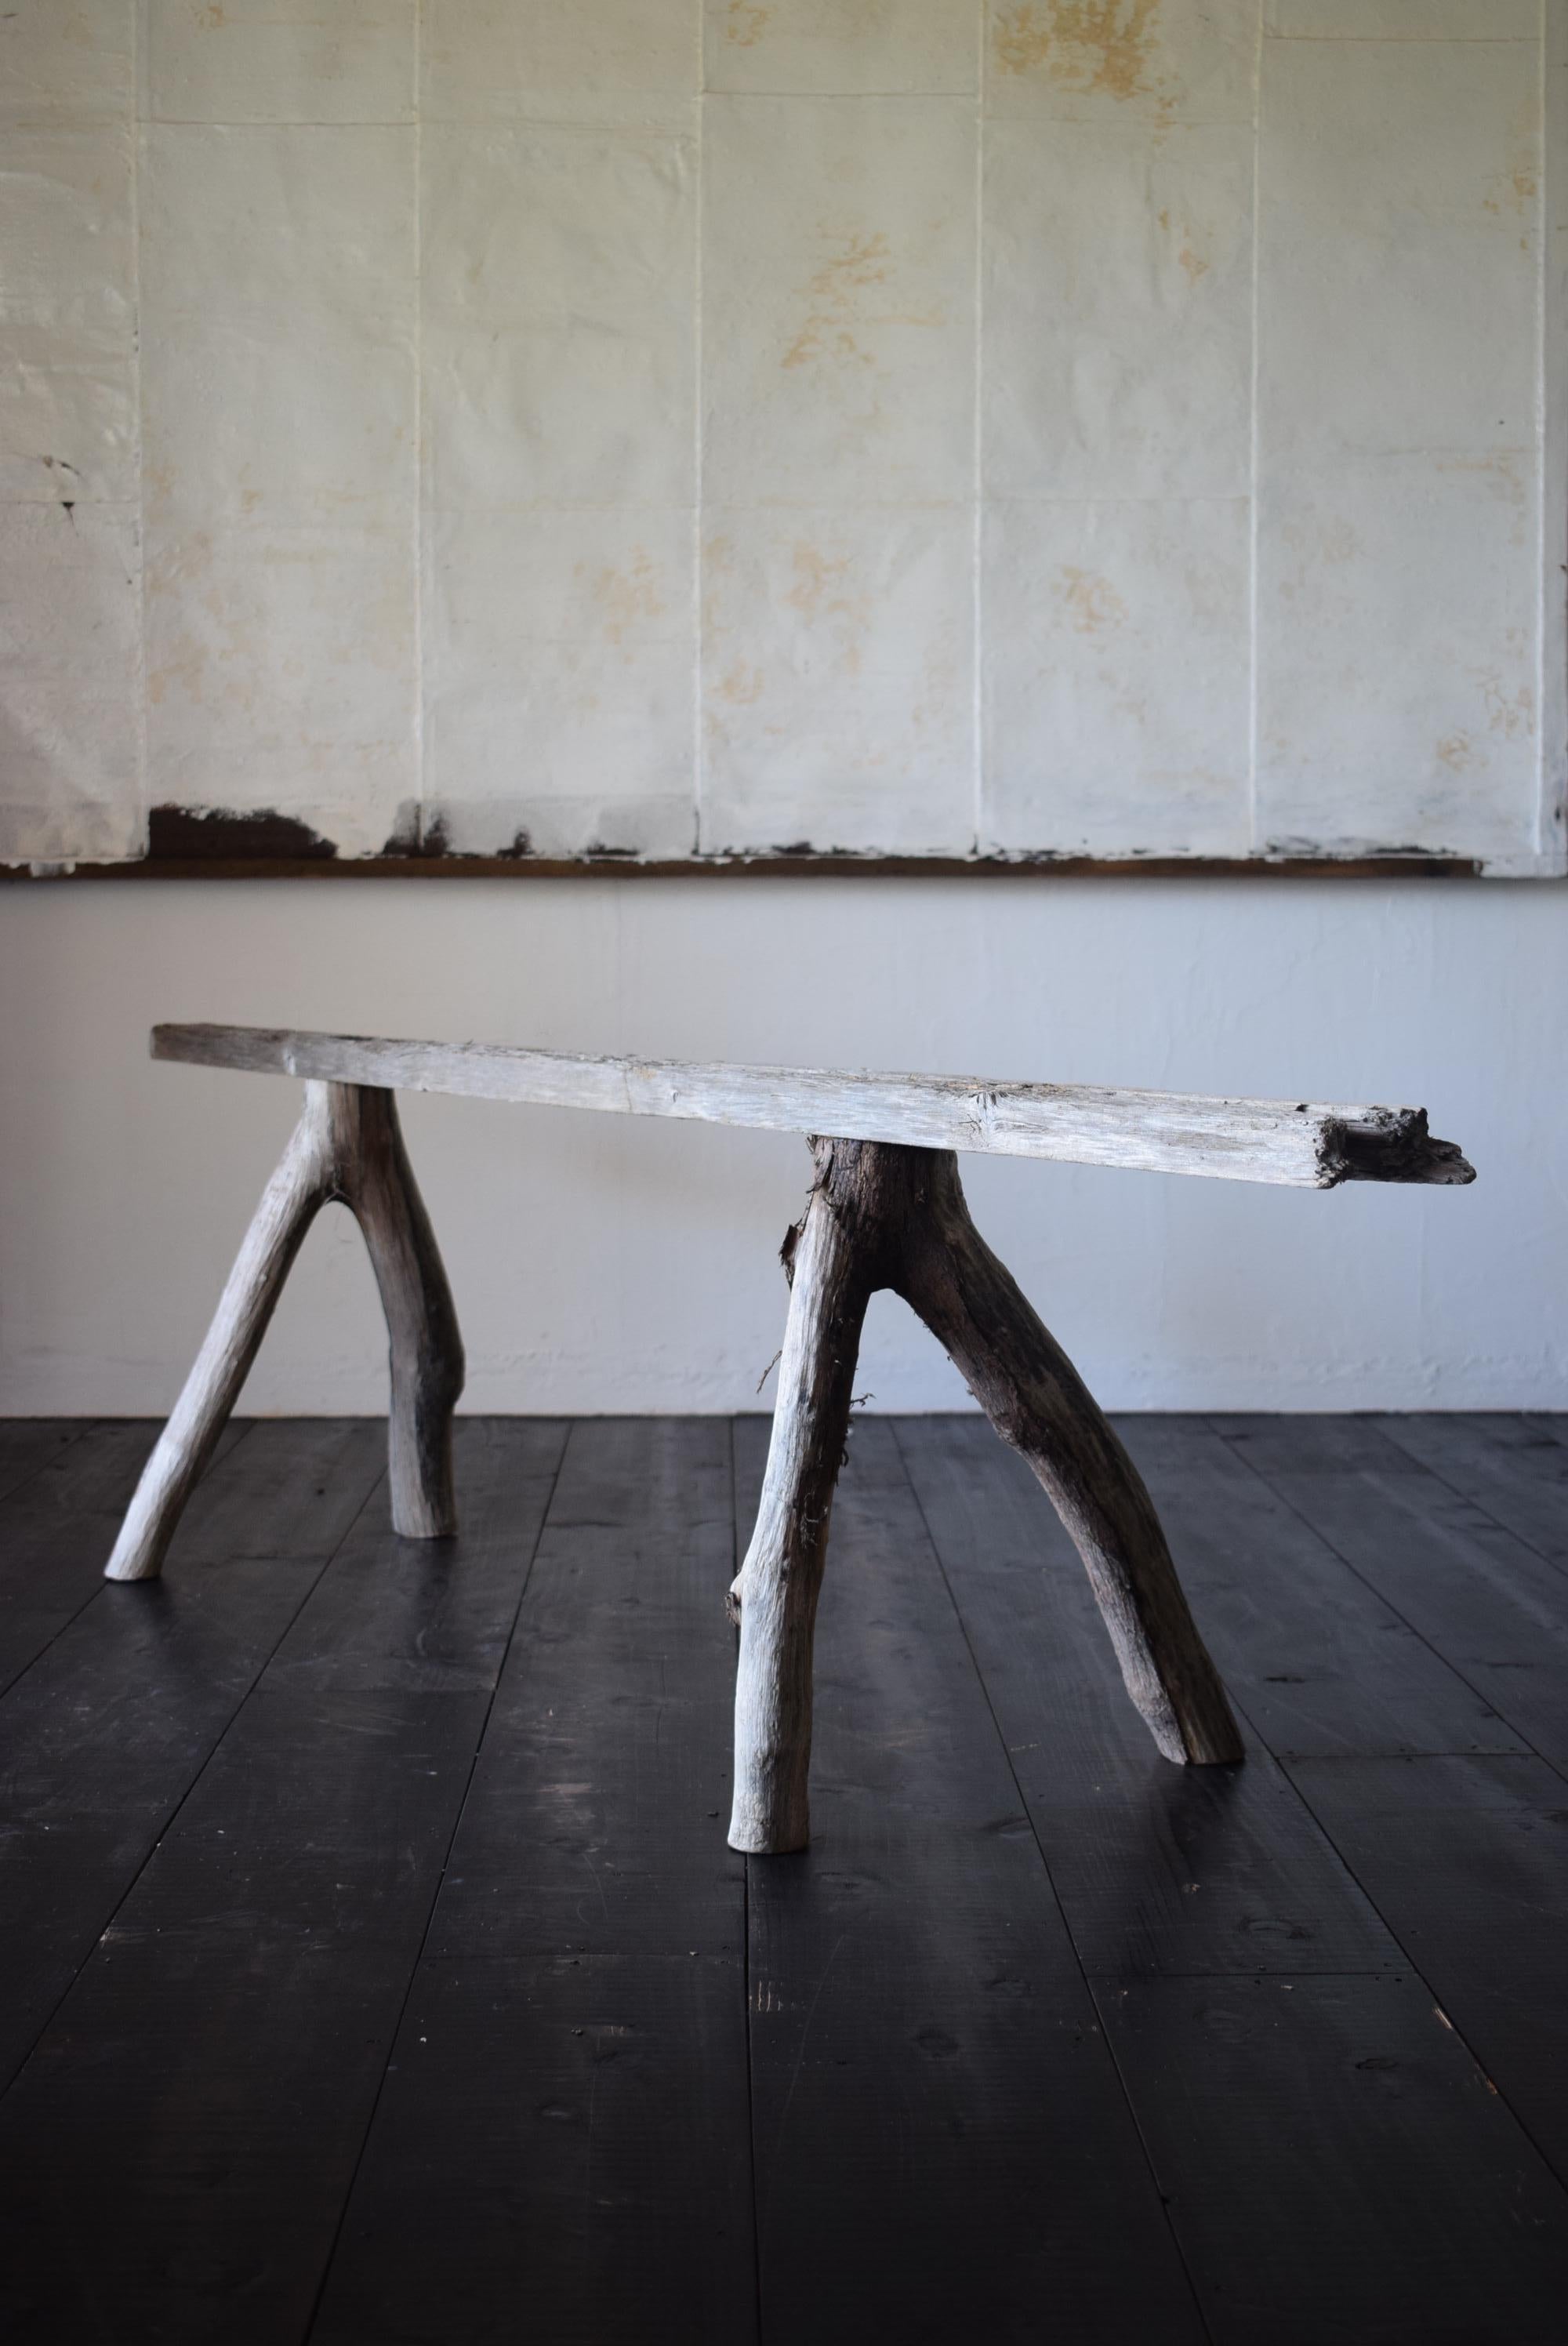 It is a solid wooden bench that makes you feel Japanese wabi-sabi. 

It's made of driftwood, but you can also sit down. It is also beautiful as an object.